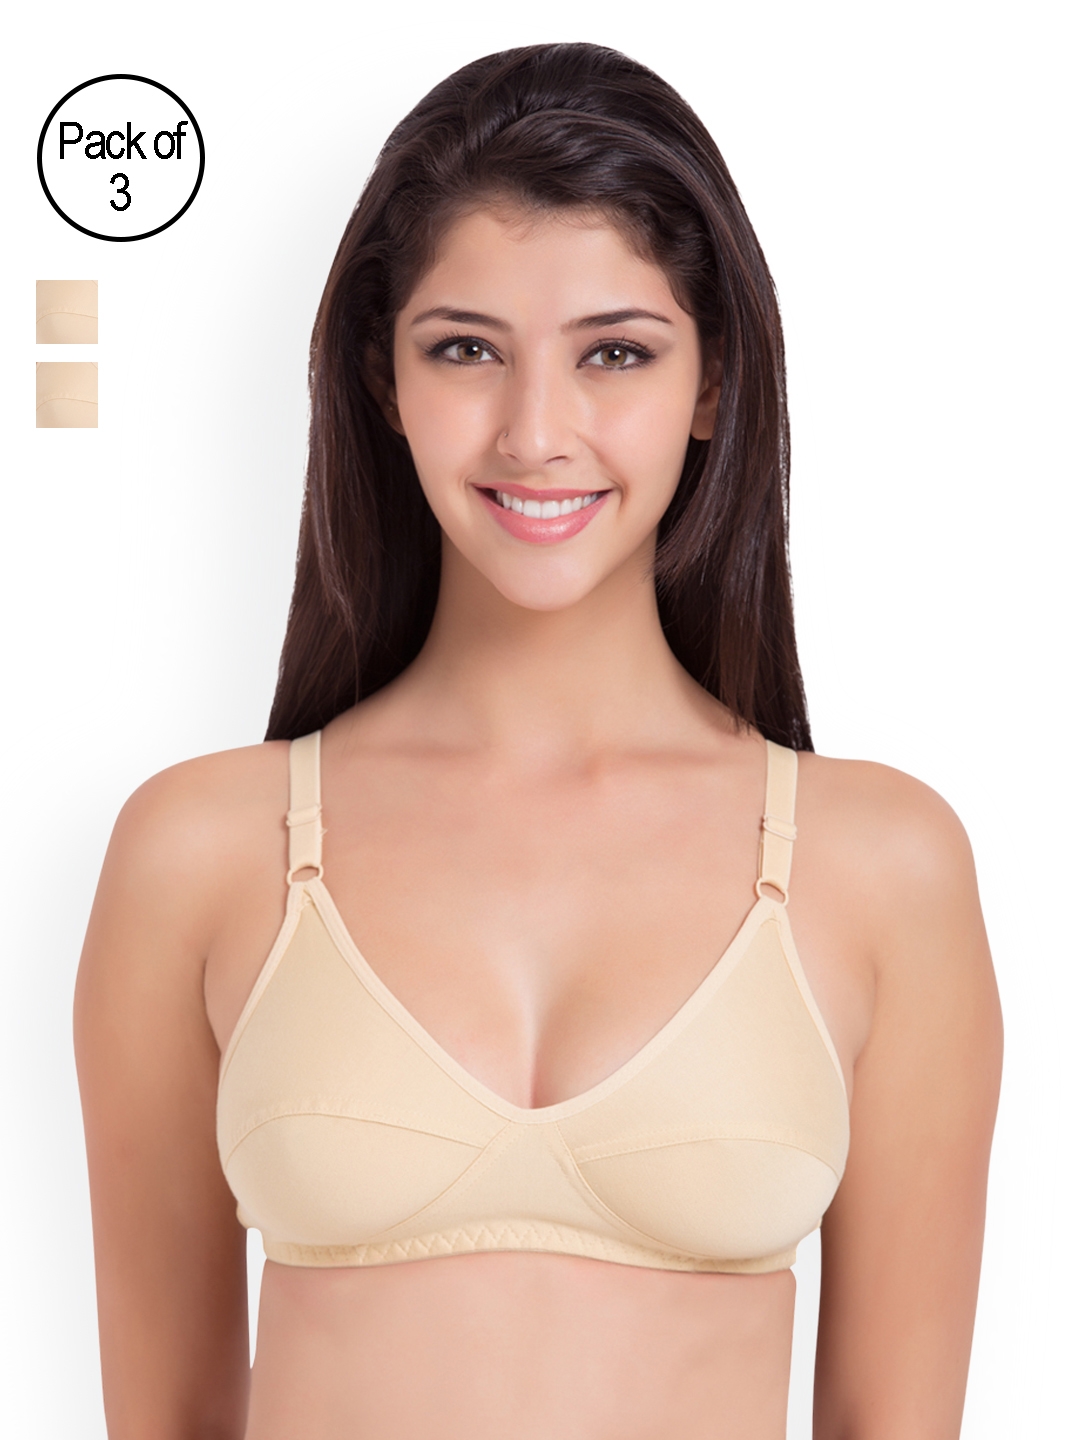 Buy Souminie Pack Of 3 Non Padded Soft Fit Bras - Bra for Women 8640841